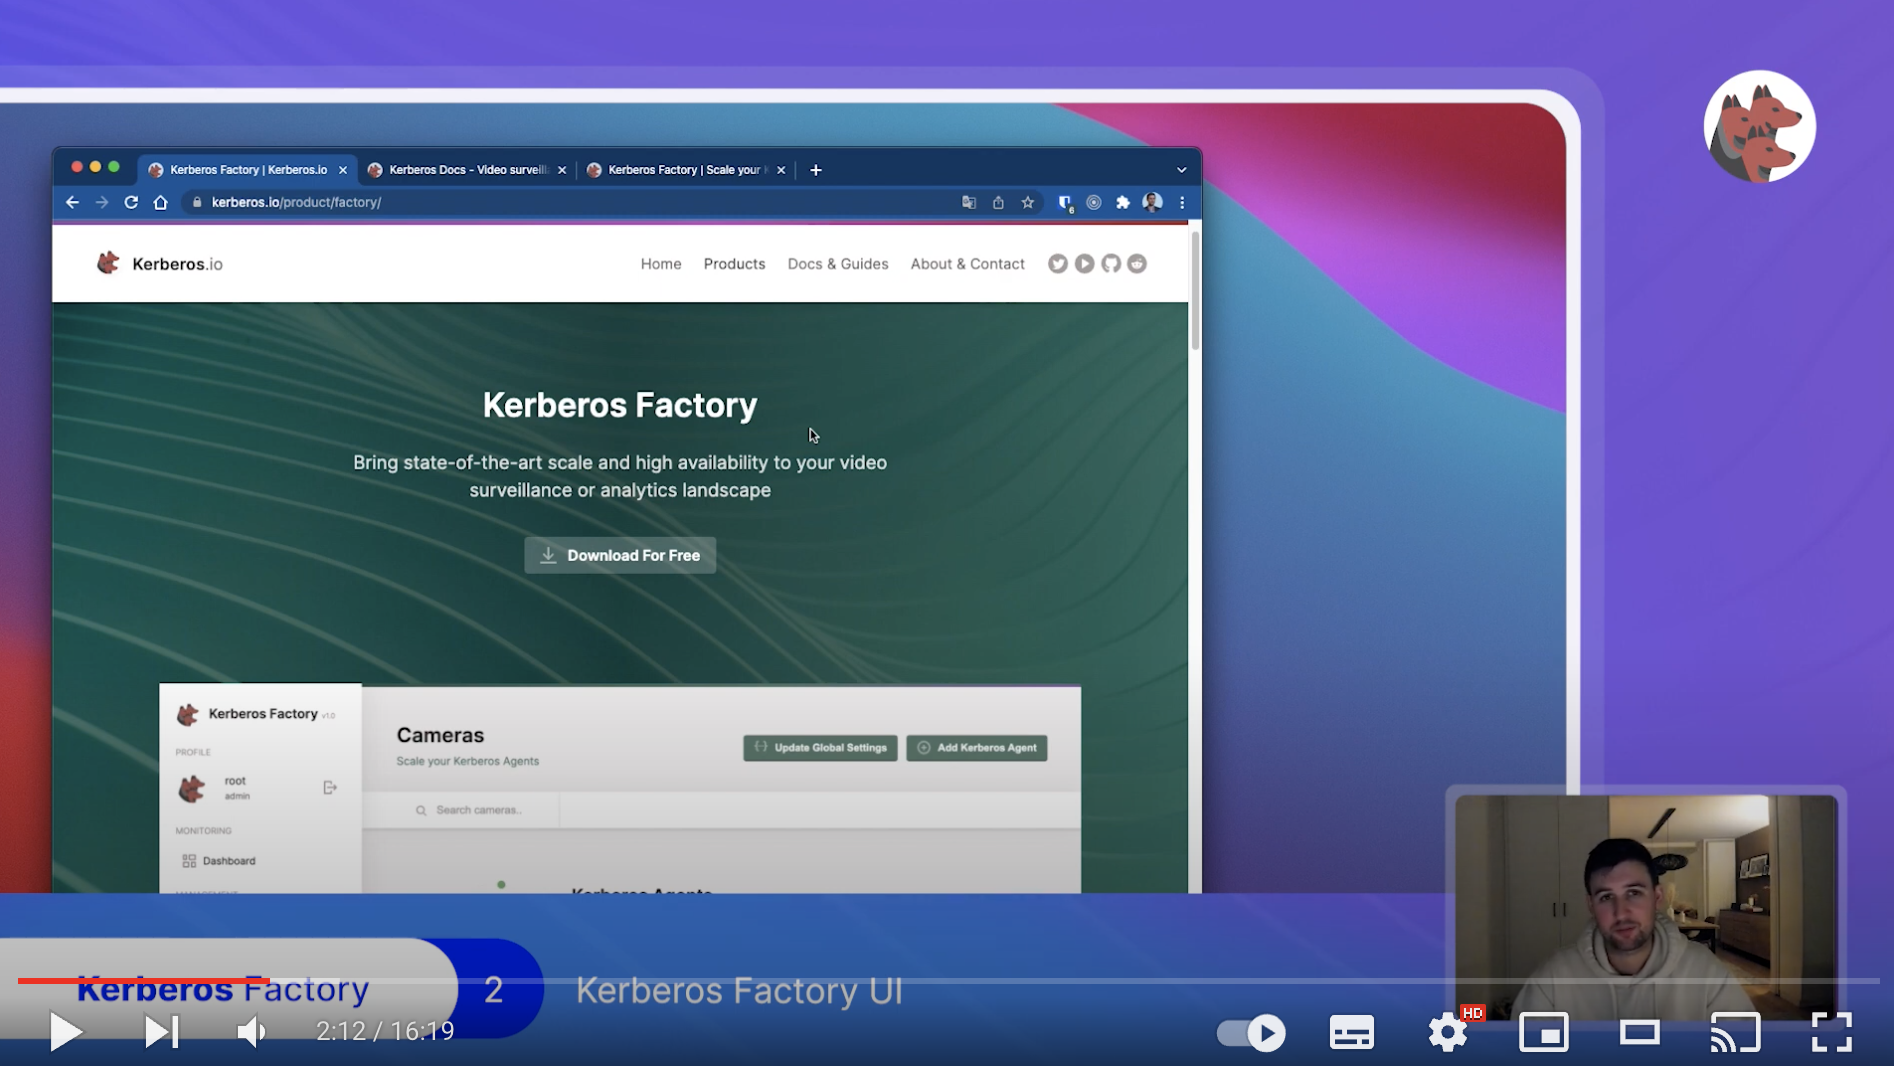 Scale your video landscape with Kerberos Factory